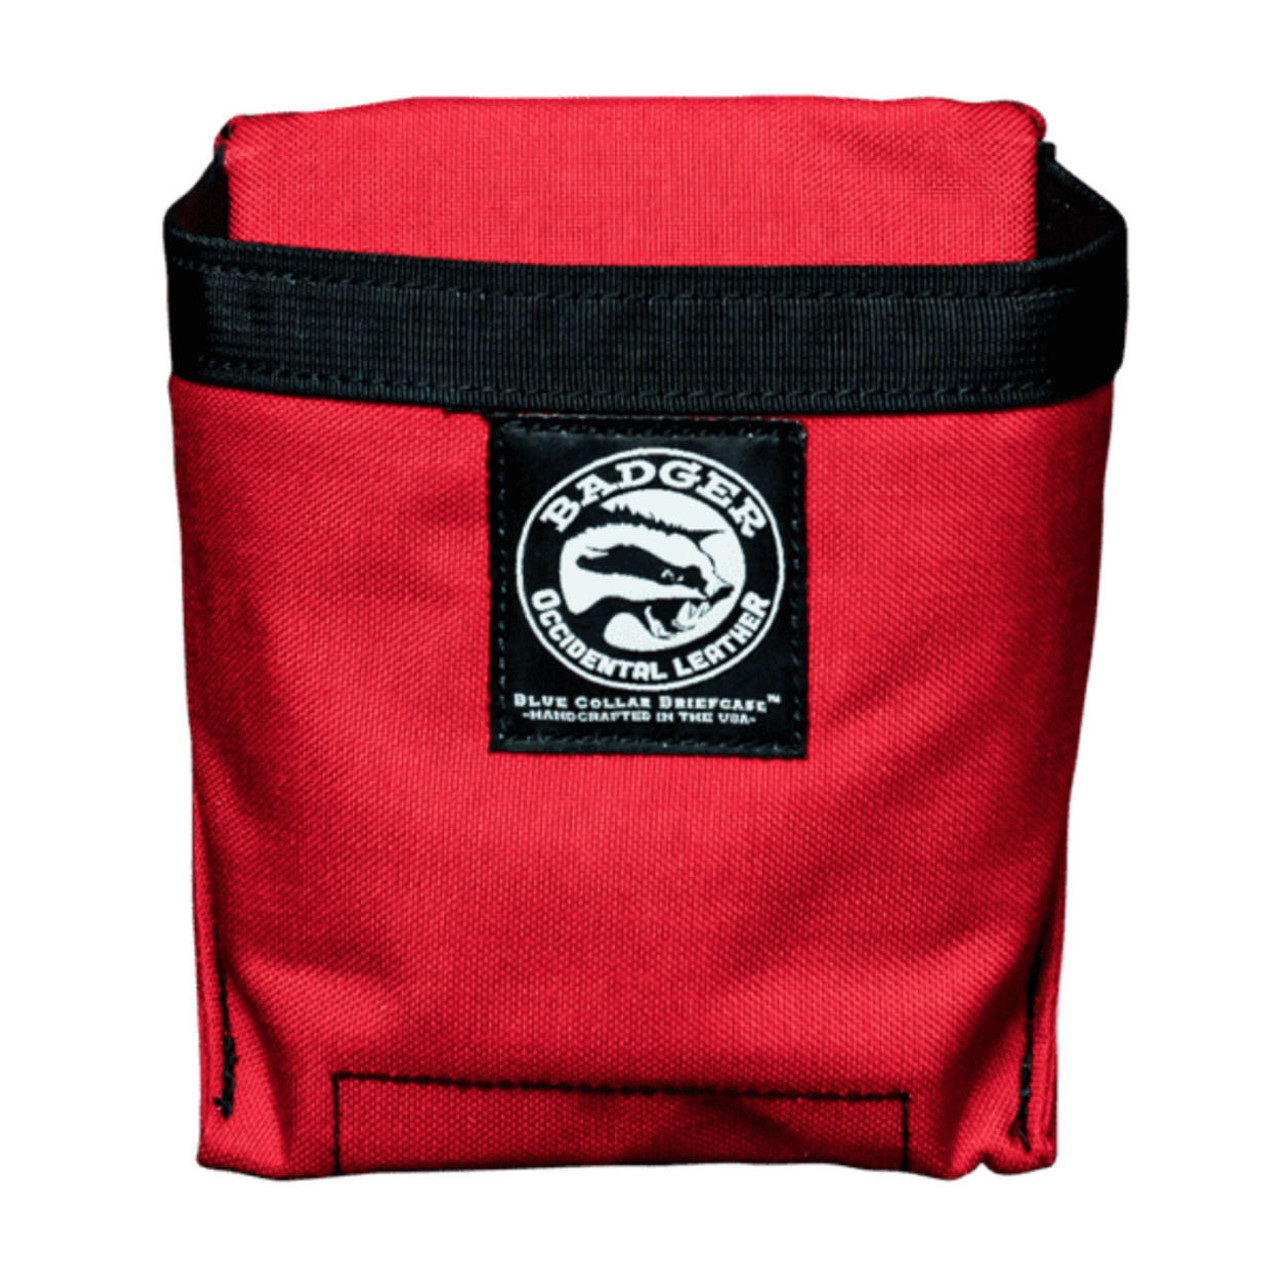  Badger Accessory Pouch Red 